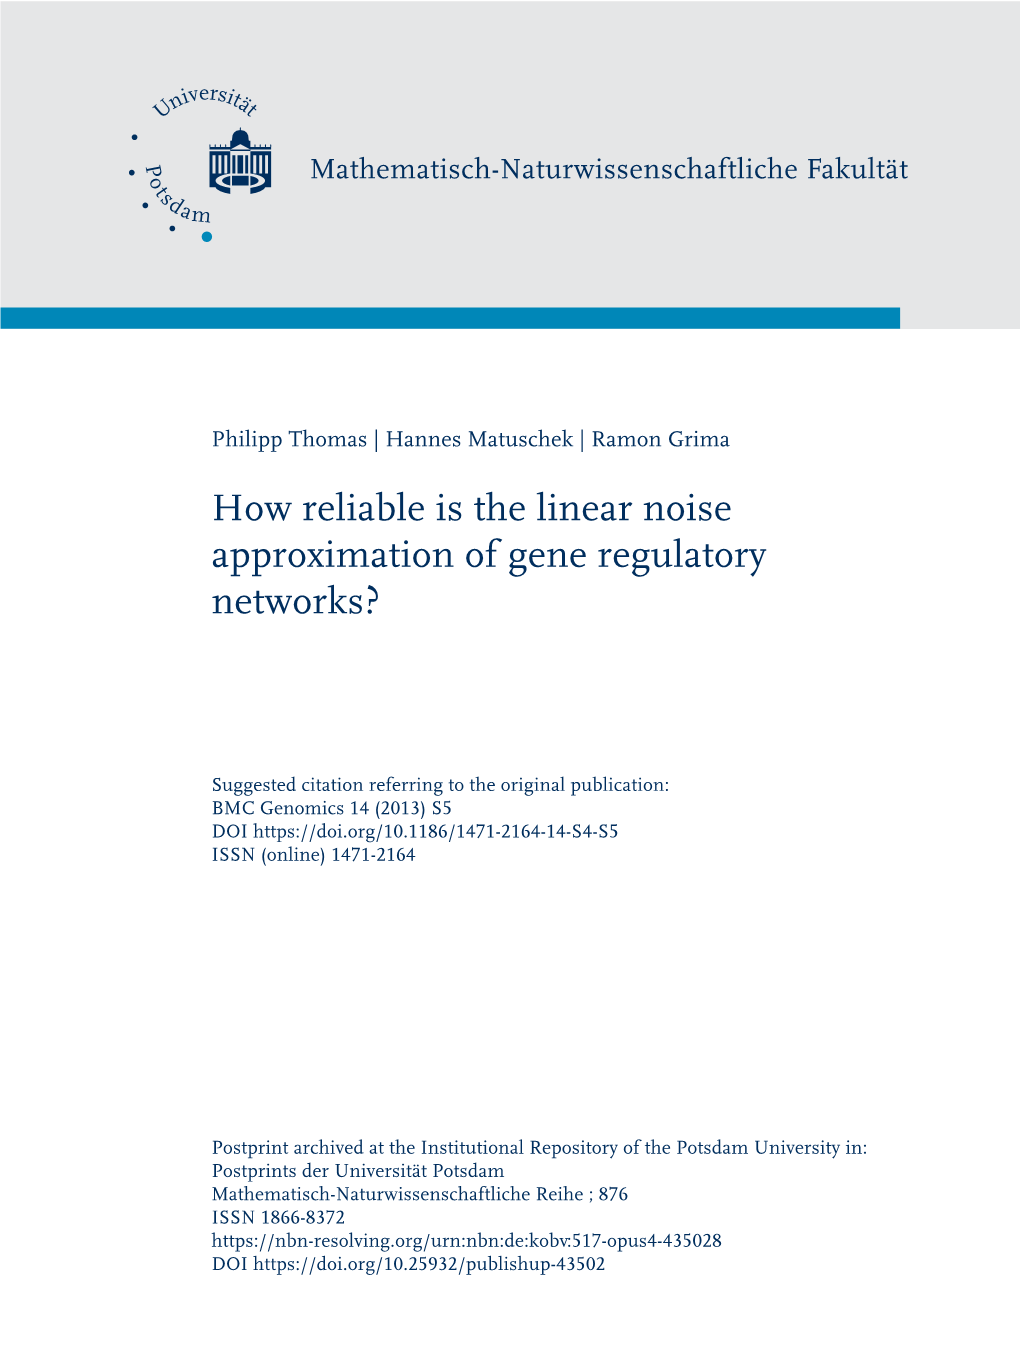 How Reliable Is the Linear Noise Approximation of Gene Regulatory Networks?